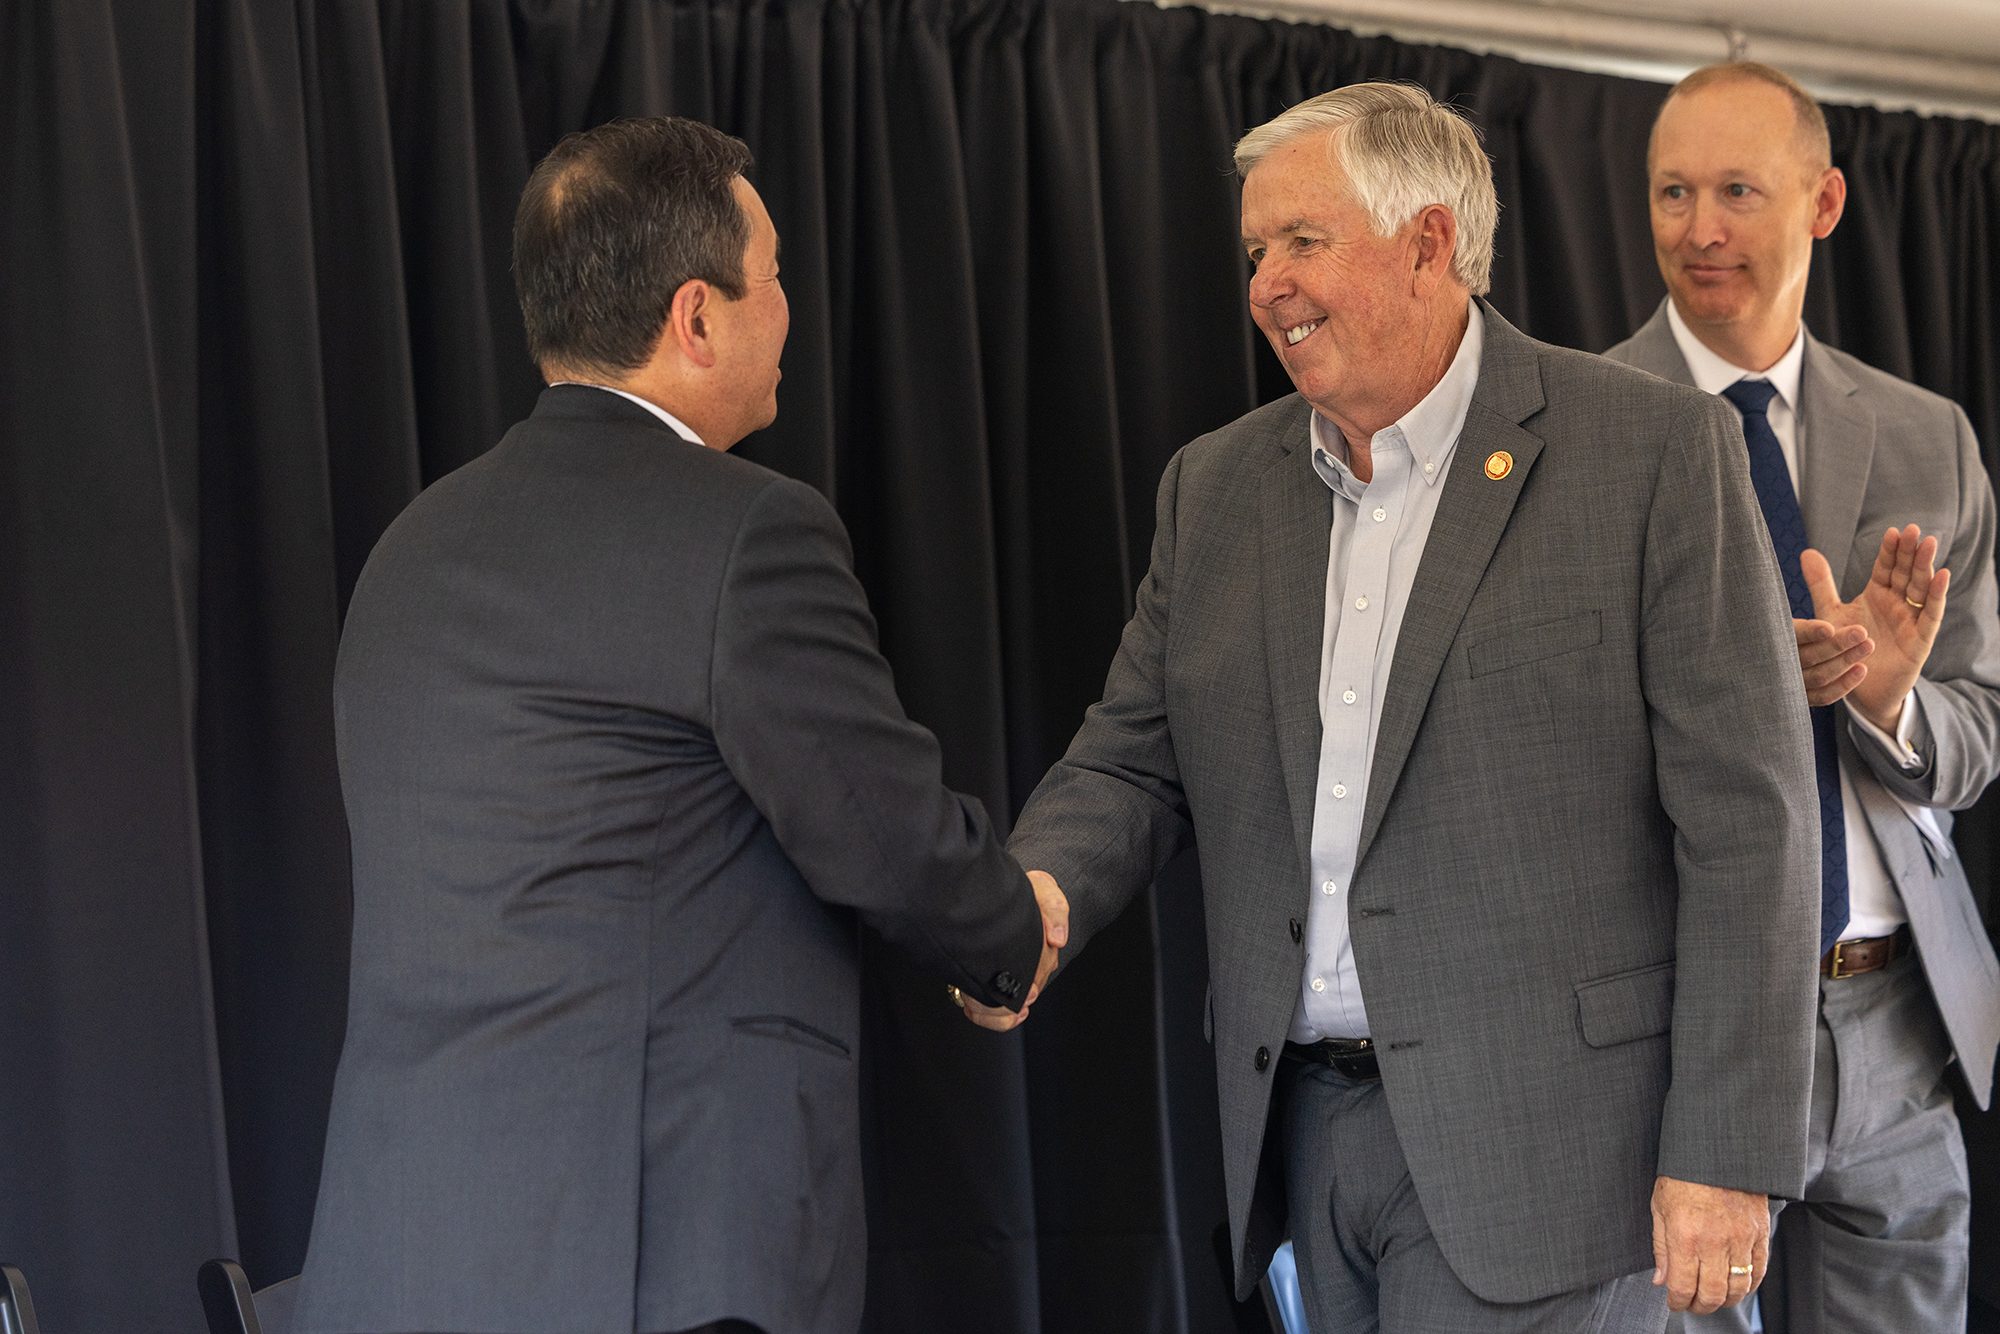 Mun Choi, president of the University of Missouri, thanks Missouri Gov. Mike Parson following his remarks at the groundbreaking ceremony for MURR West.